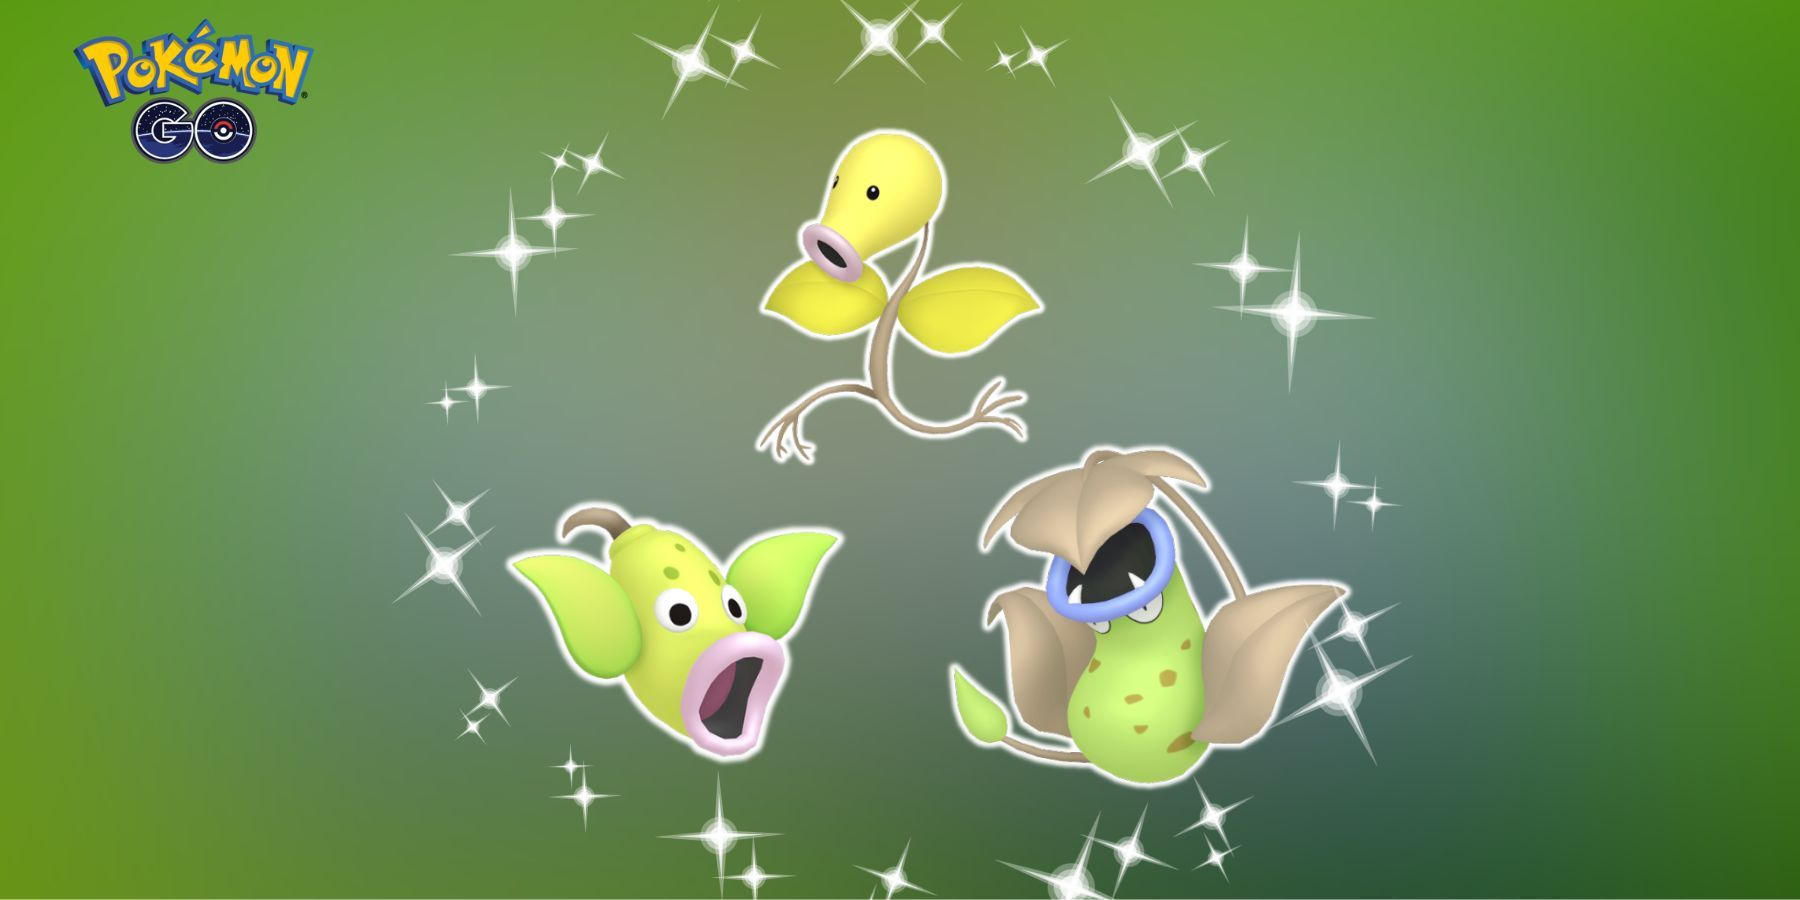 Shiny Bellsprout, Shiny Weepinbell, and Shiny Victreebel in Pokemon GO